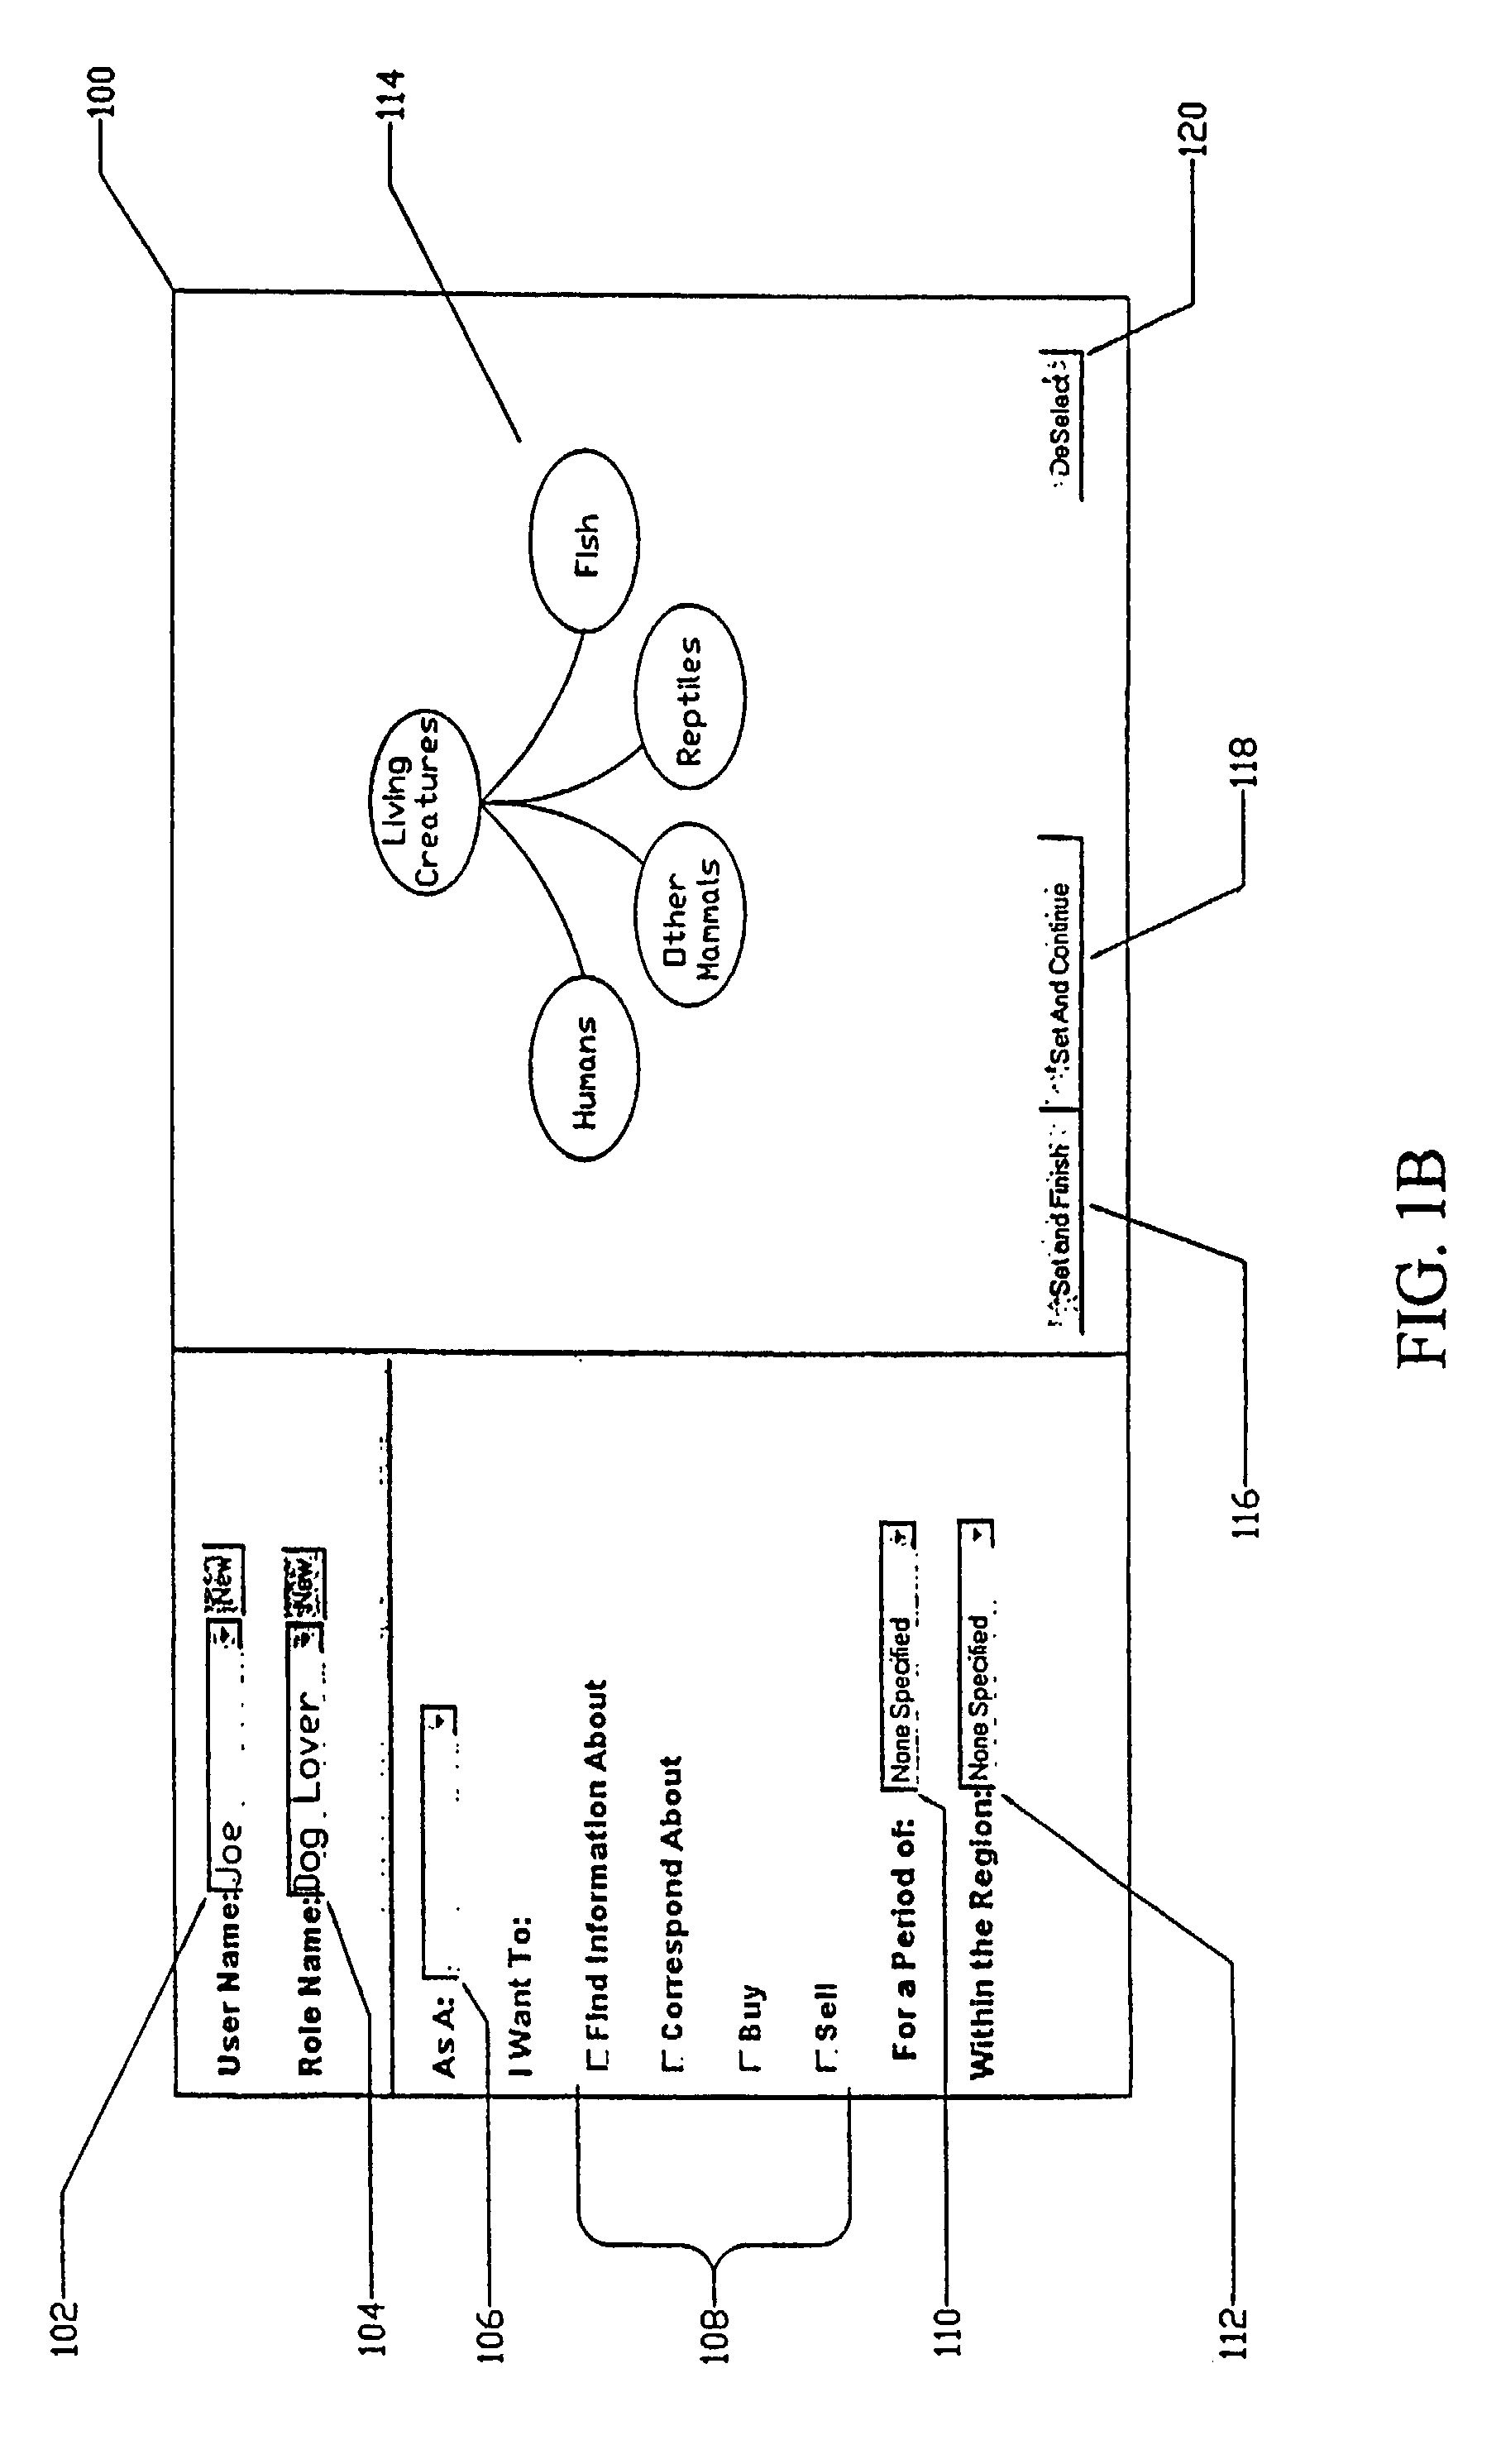 Verbal classification system for the efficient sending and receiving of information